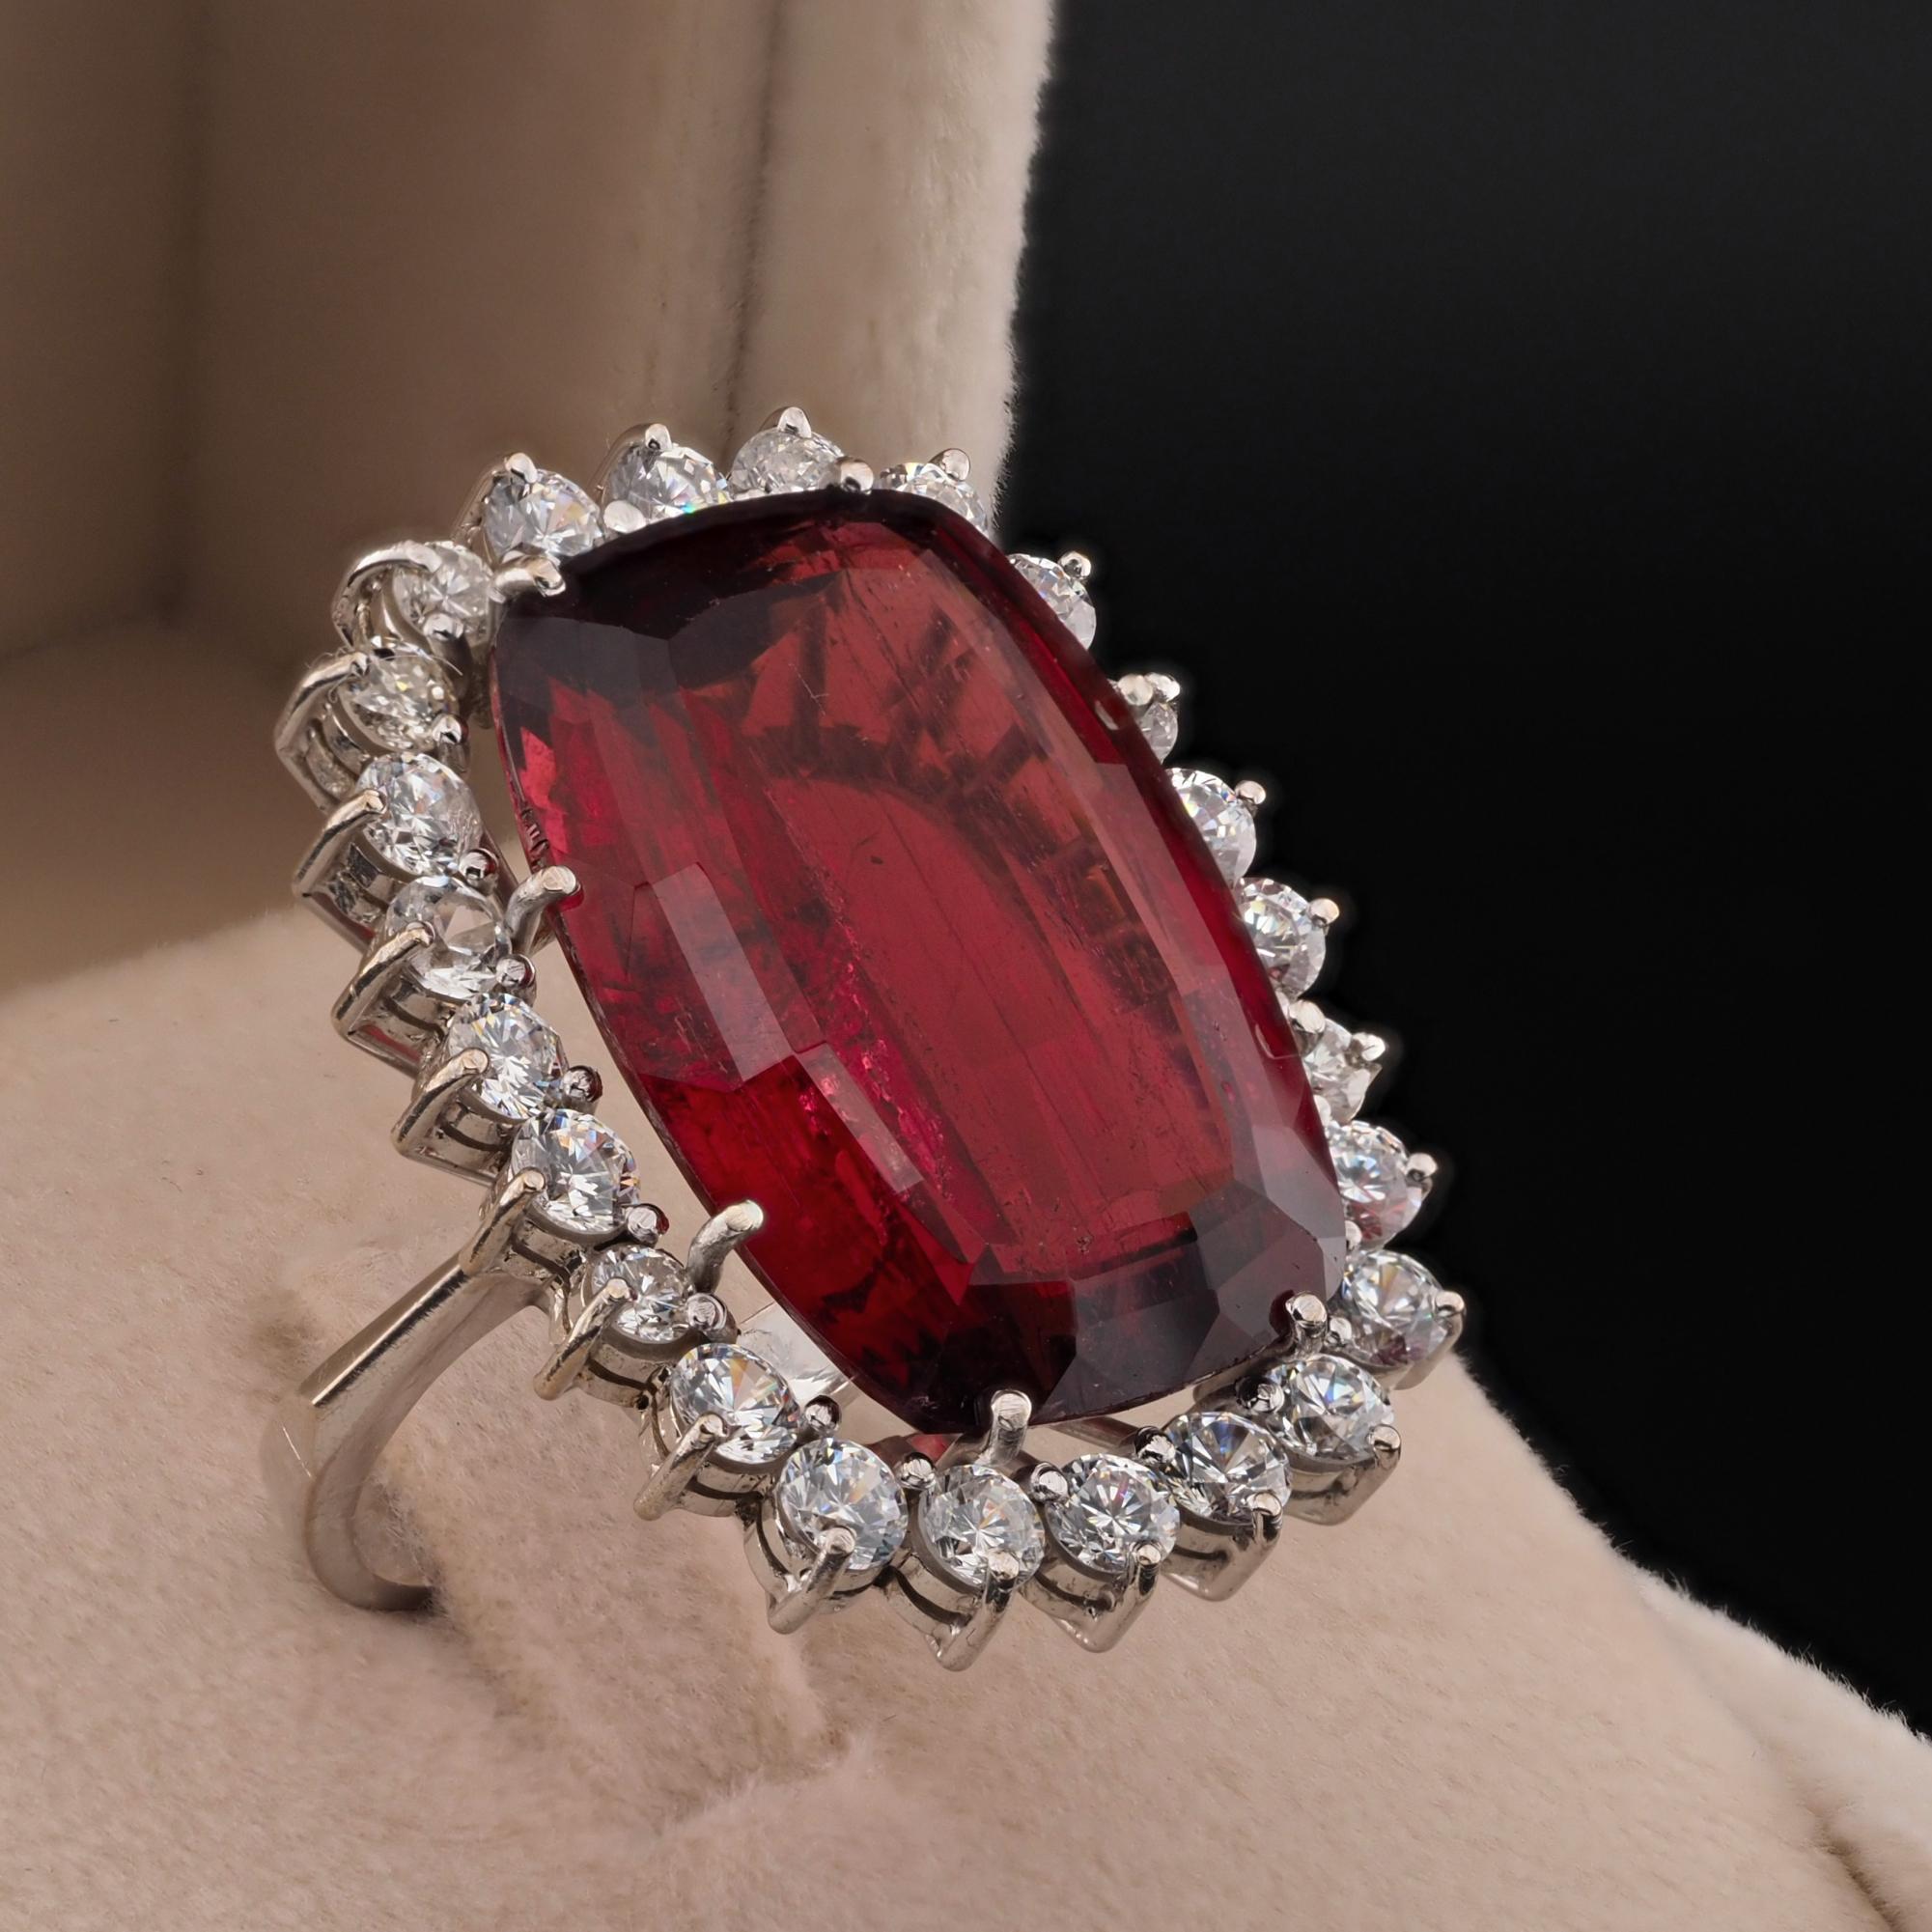 25.00 Carats Earth Gift
Extraordinary estate ring set with a natural untreated Red Rubellite, totally natural, earth gift – 25.00 Ct. prizing stunning Red Colour
Hand crafted mount of solid 18 Kt white gold, marked
Centre red Rubellite is 25.00 Ct